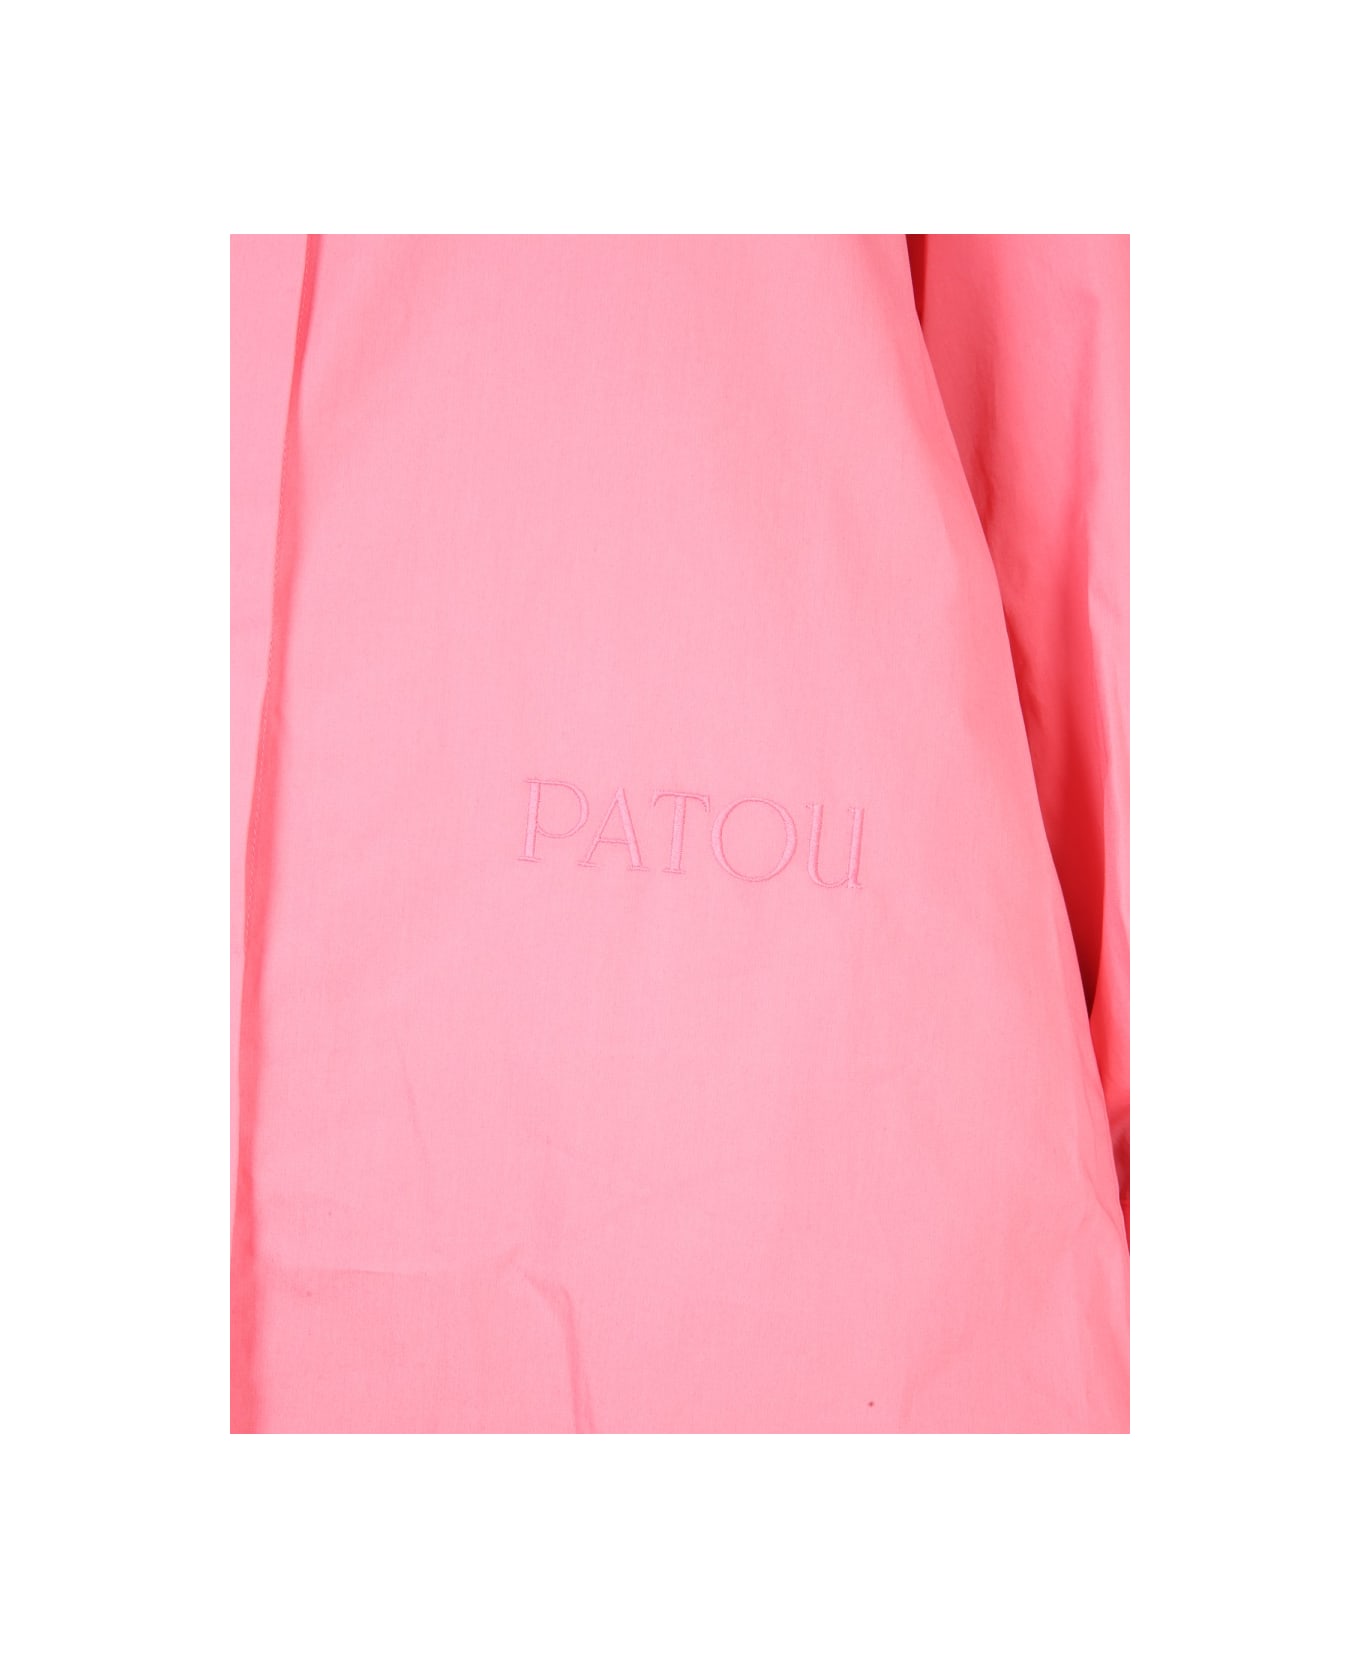 Patou Shirt Dress With Logo Embroidery - PINK